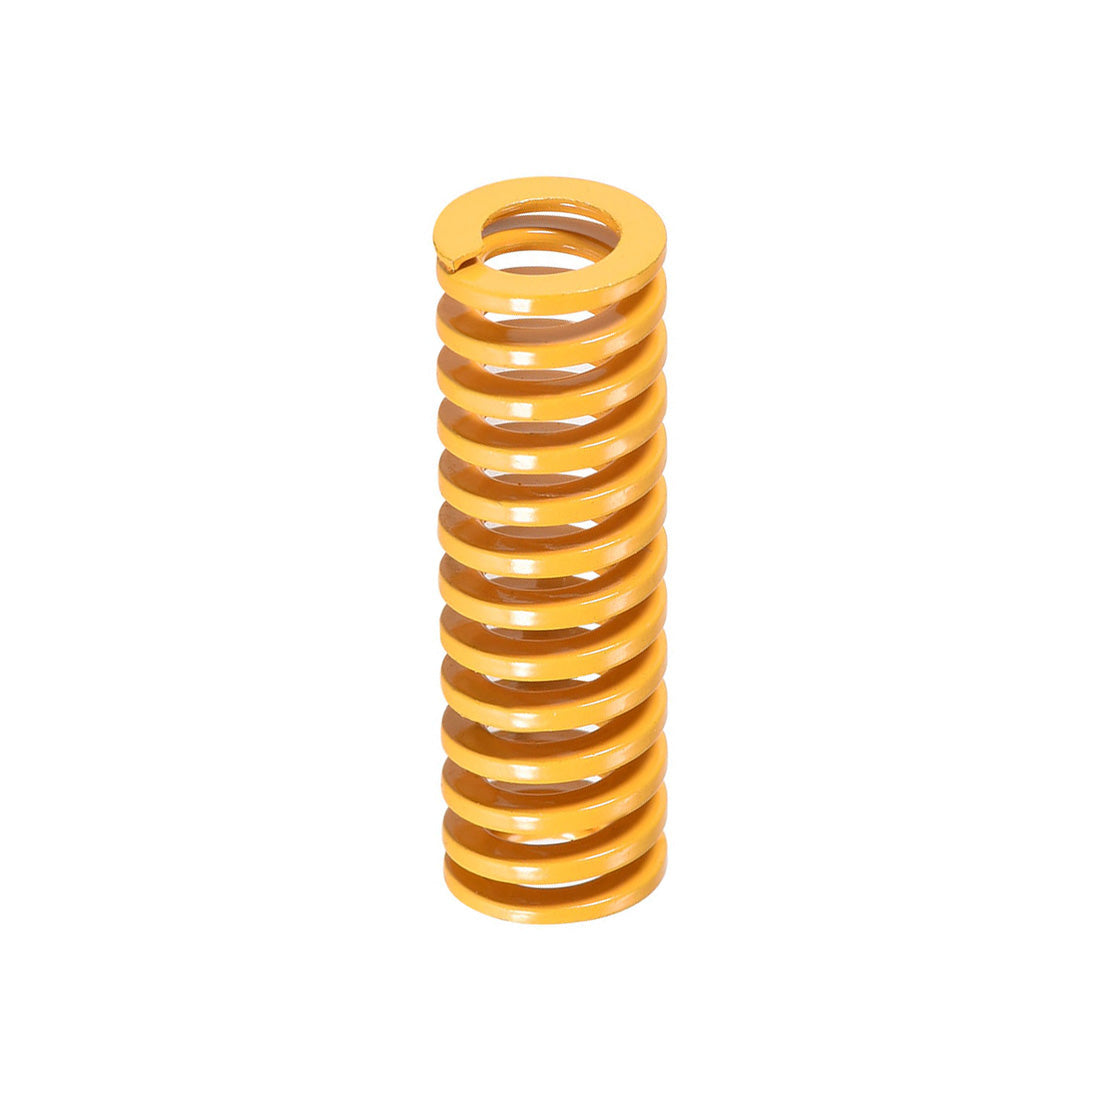 uxcell Uxcell Heated Bed Springs for 3D Printer Light Load Compression Spring, 8 x 25 mm 10pcs